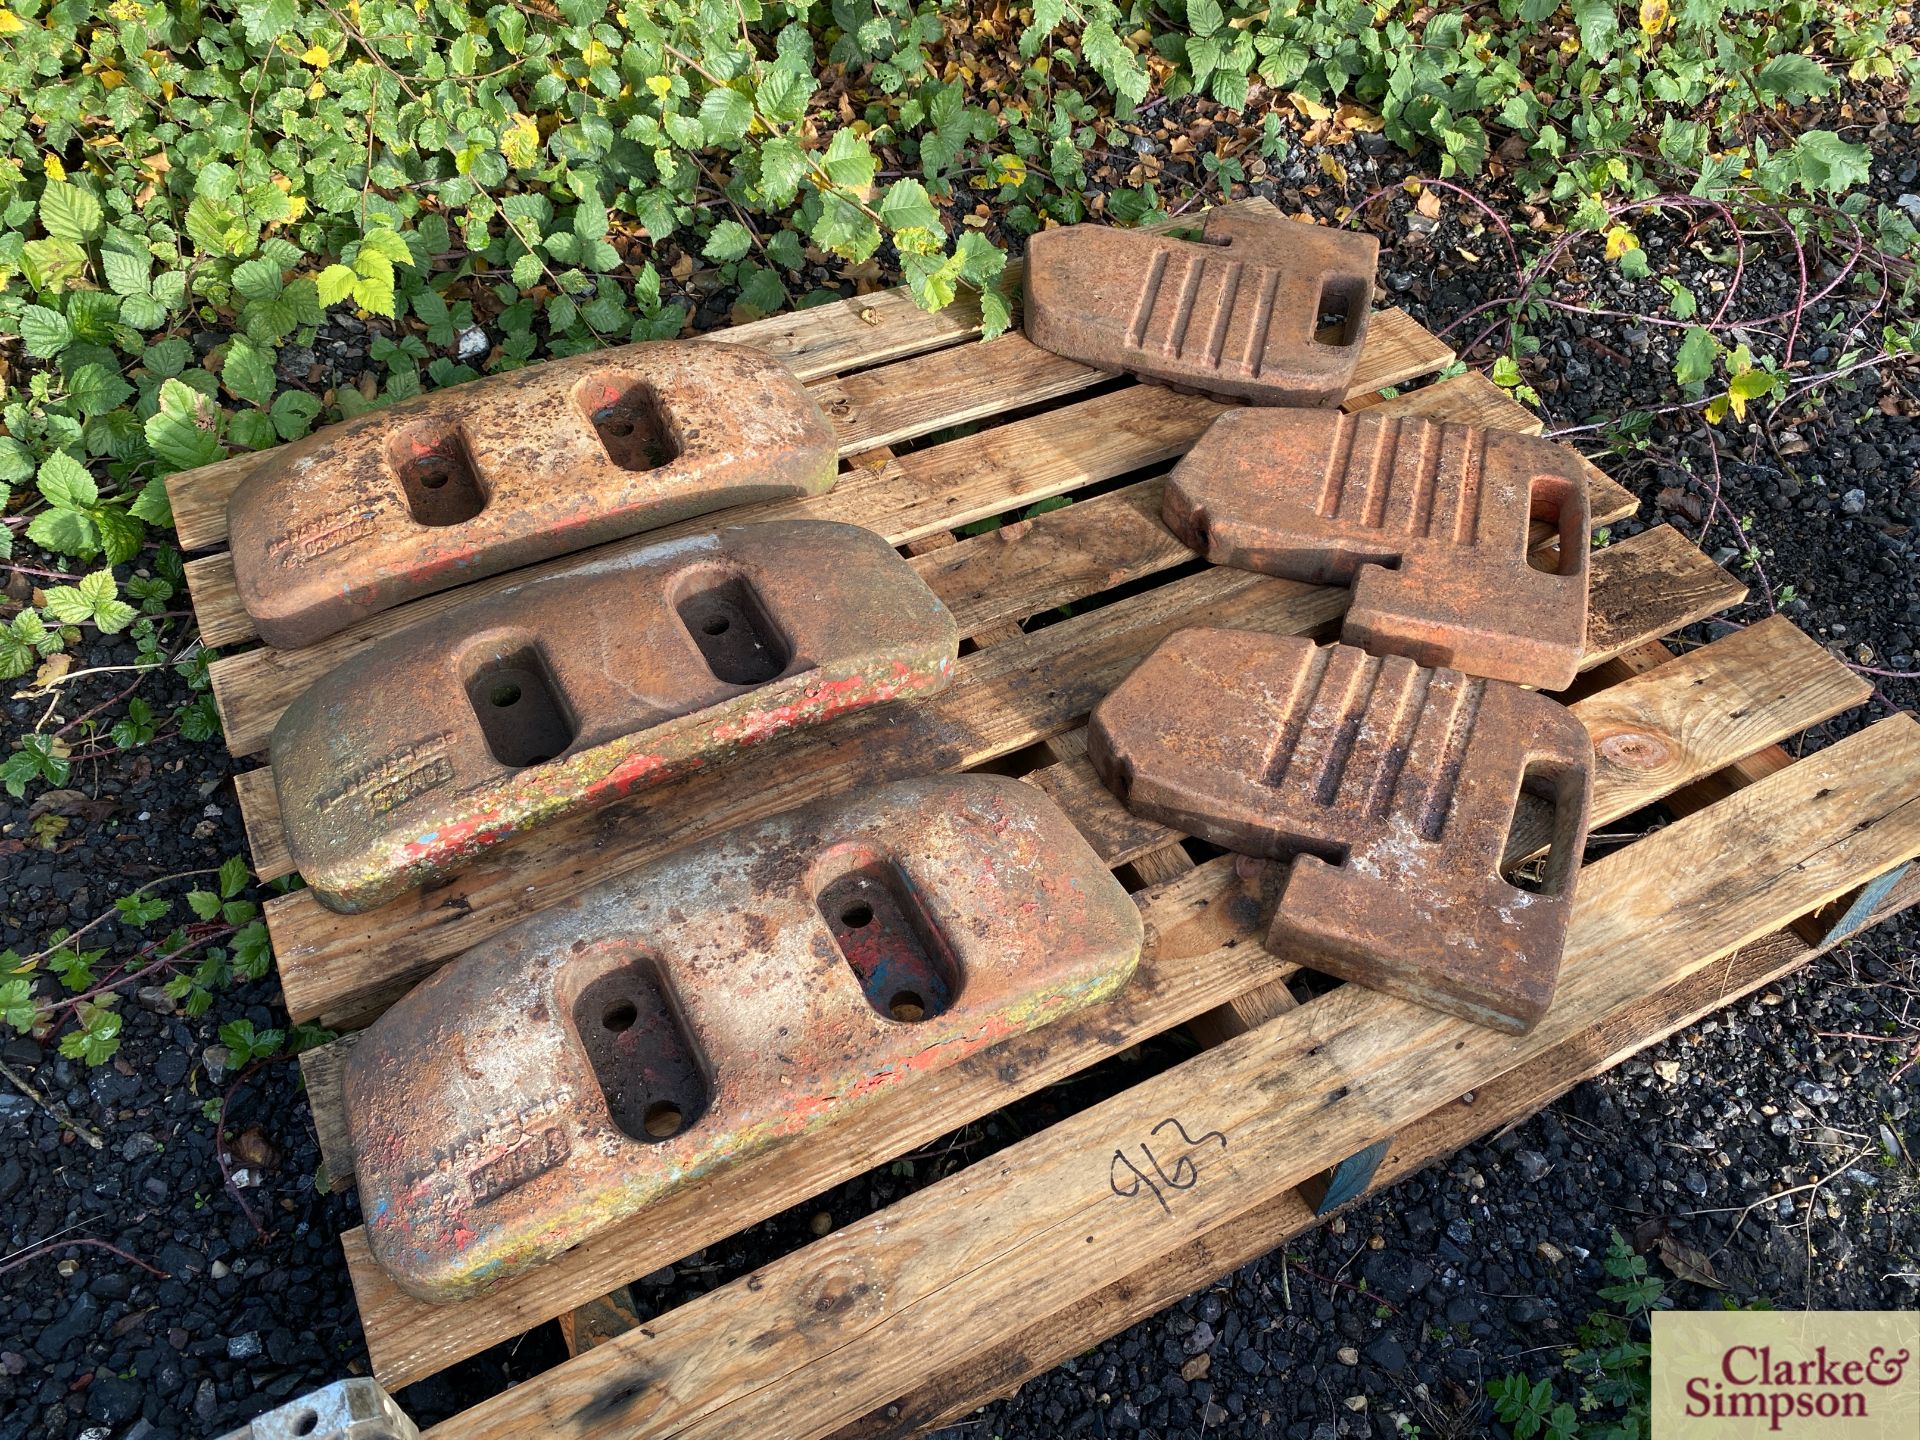 Quantity of tractor weights.